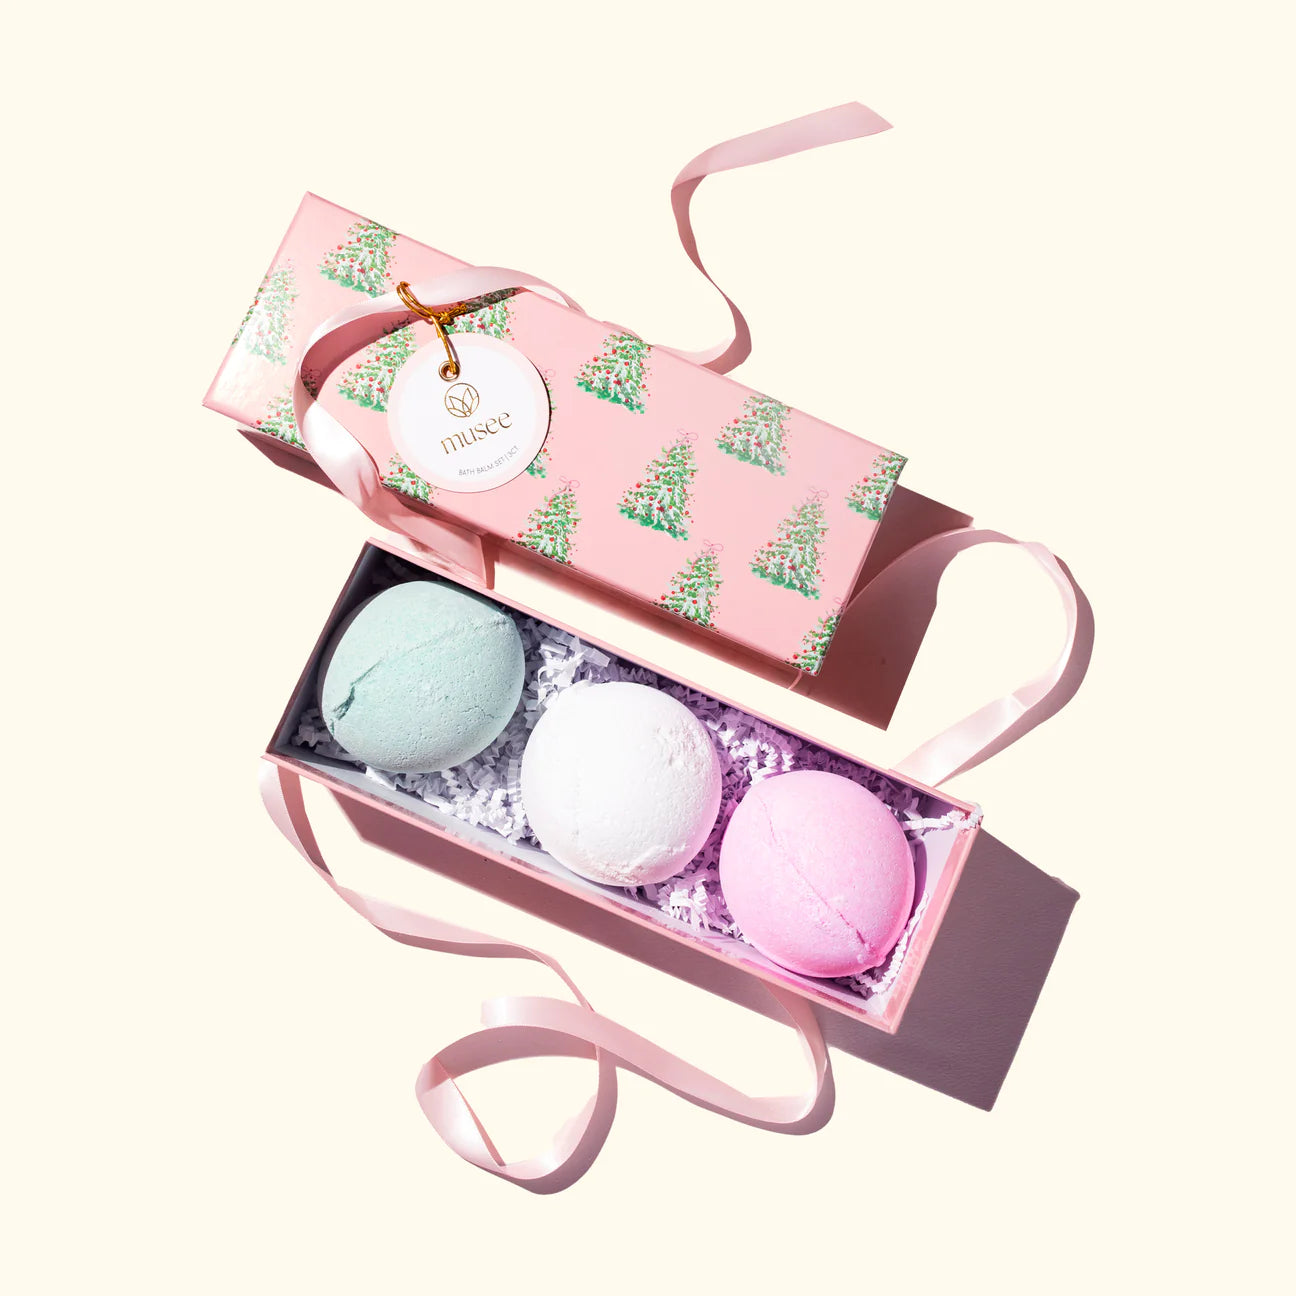 This Musee Christmas 3 Bath Balm Set features three festive bath bombs presented in a pink box with a beautiful ribbon. Perfect for relaxation and pampering at home during the holiday season!